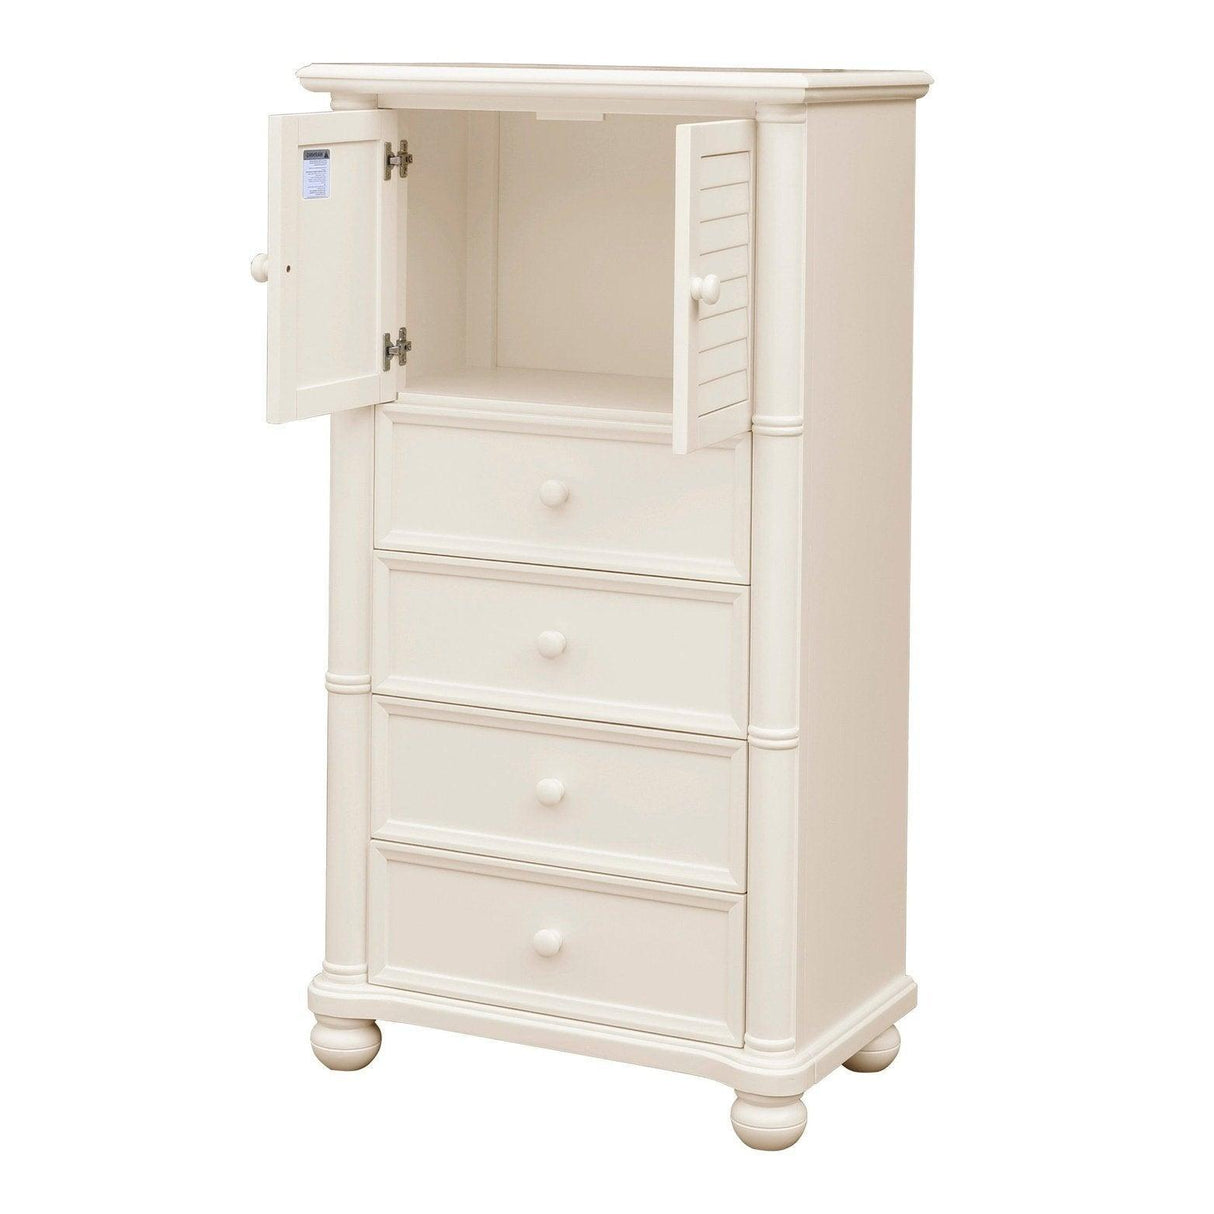 Sunset Trading Ice Cream at the Beach 5 Piece Queen Bedroom Set | Bed Dresser Mirror Storage Chest Nightstand CF-1701-0111-Q-5PC - Bedroom Depot USA